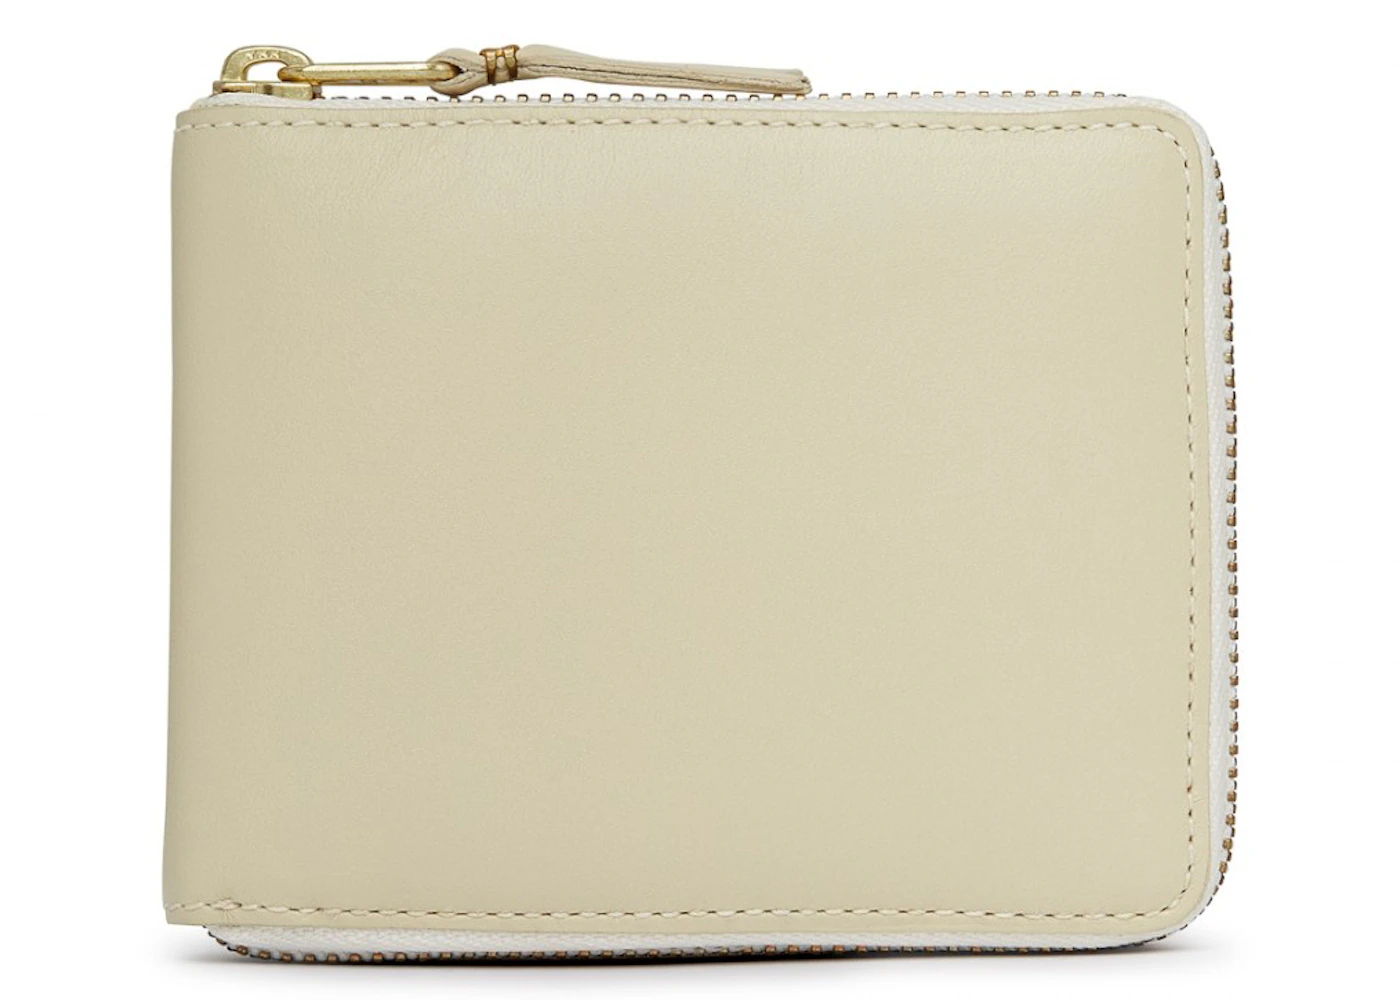 Comme des Garcons SA7100 Classic Plain Wallet Off-White in Leather with ...